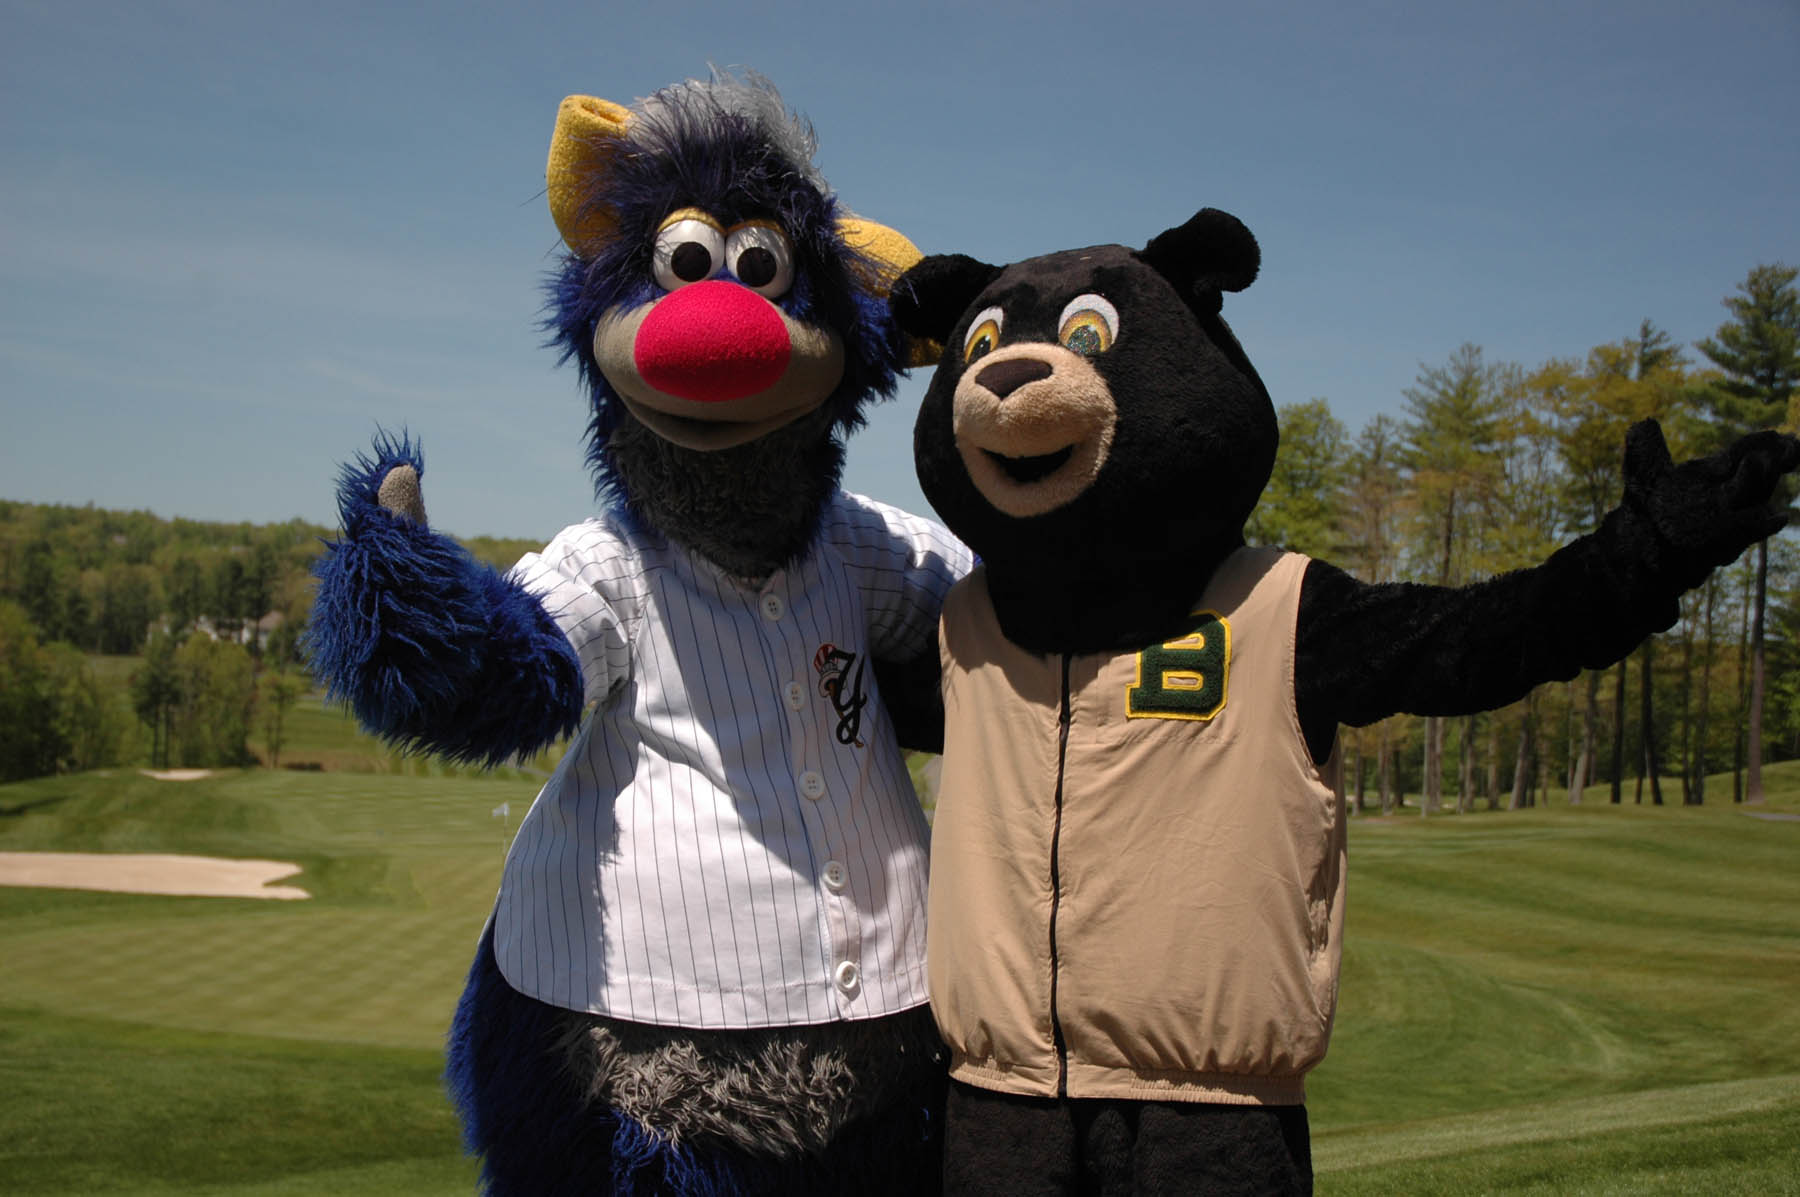 Two mascots, Champ and Boomer, posing on golf course.